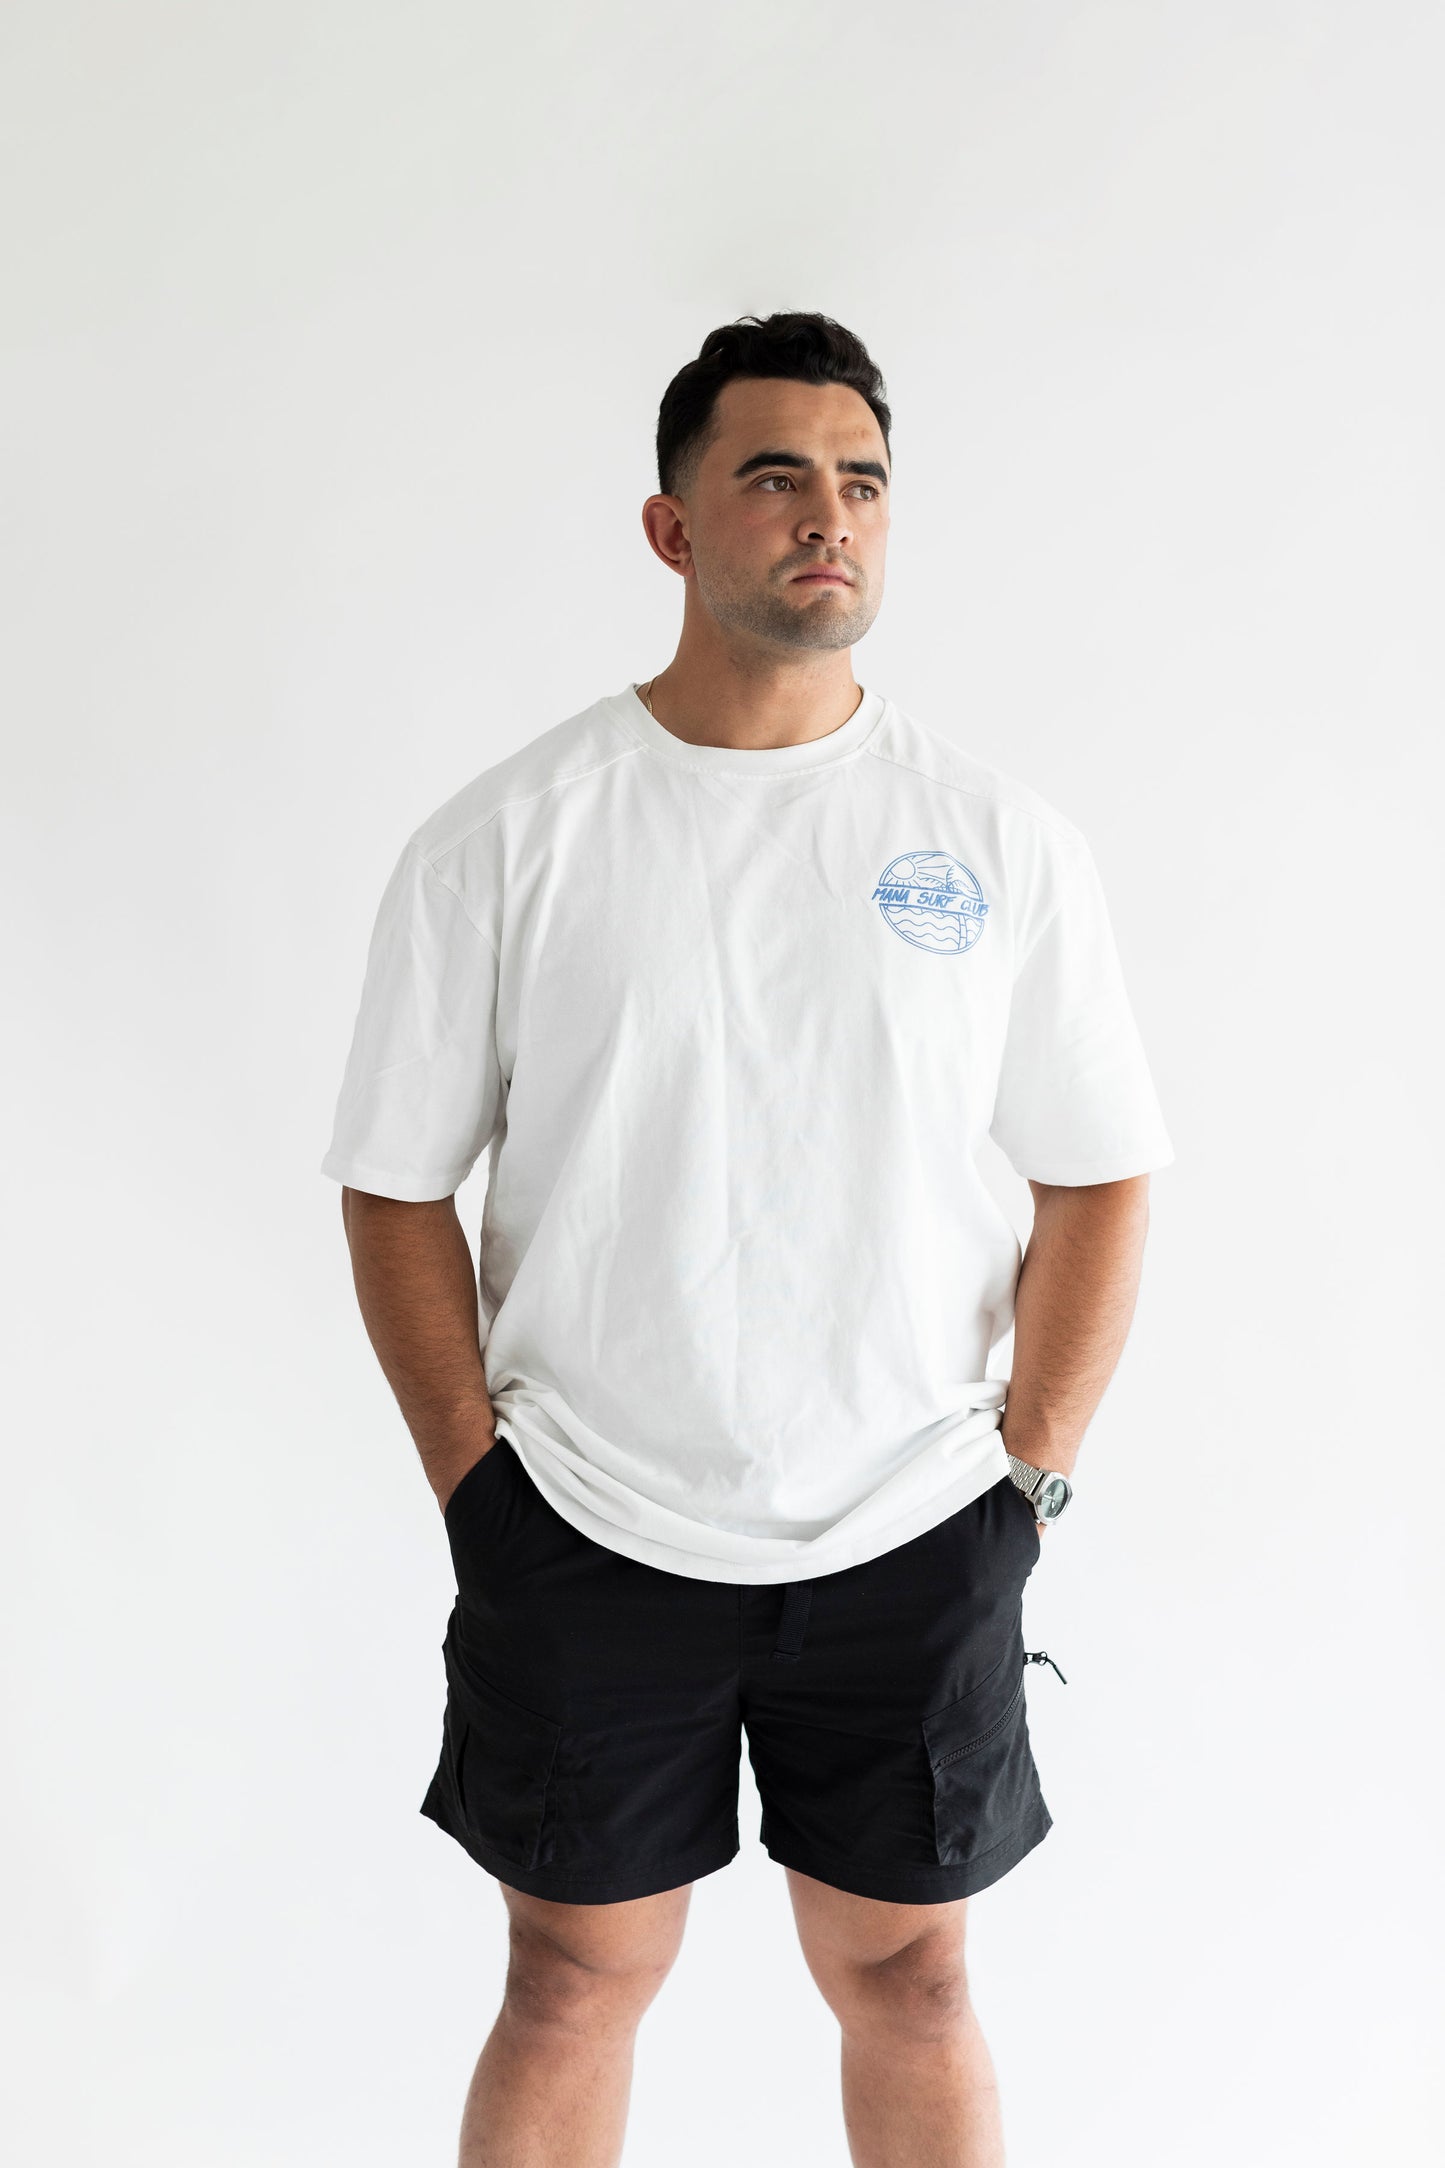 Surf Club Tee - Washed White